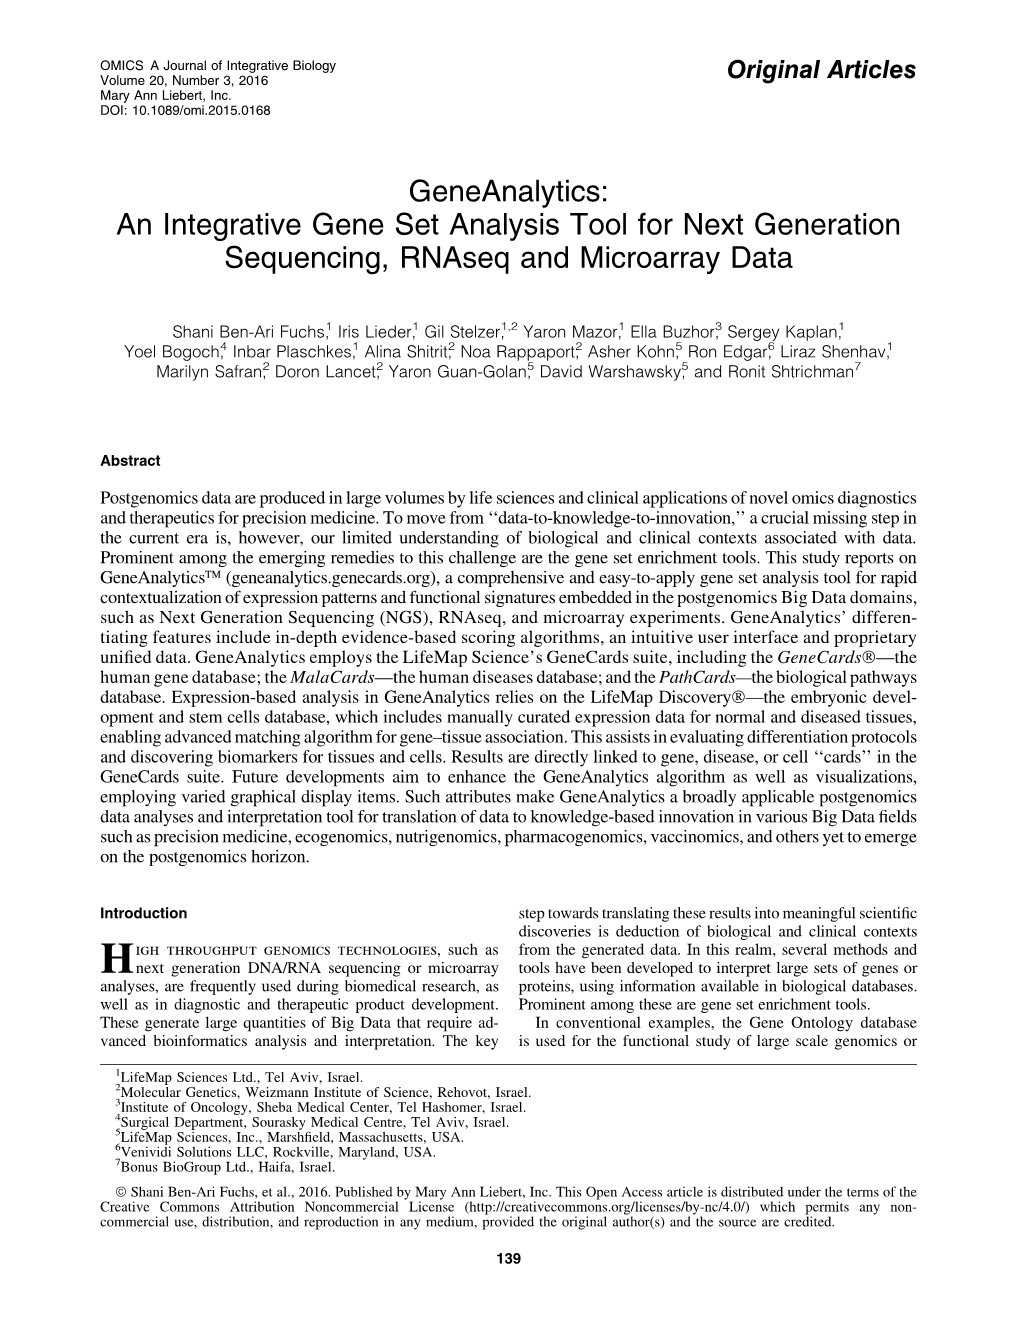 An Integrative Gene Set Analysis Tool for Next Generation Sequencing, Rnaseq and Microarray Data